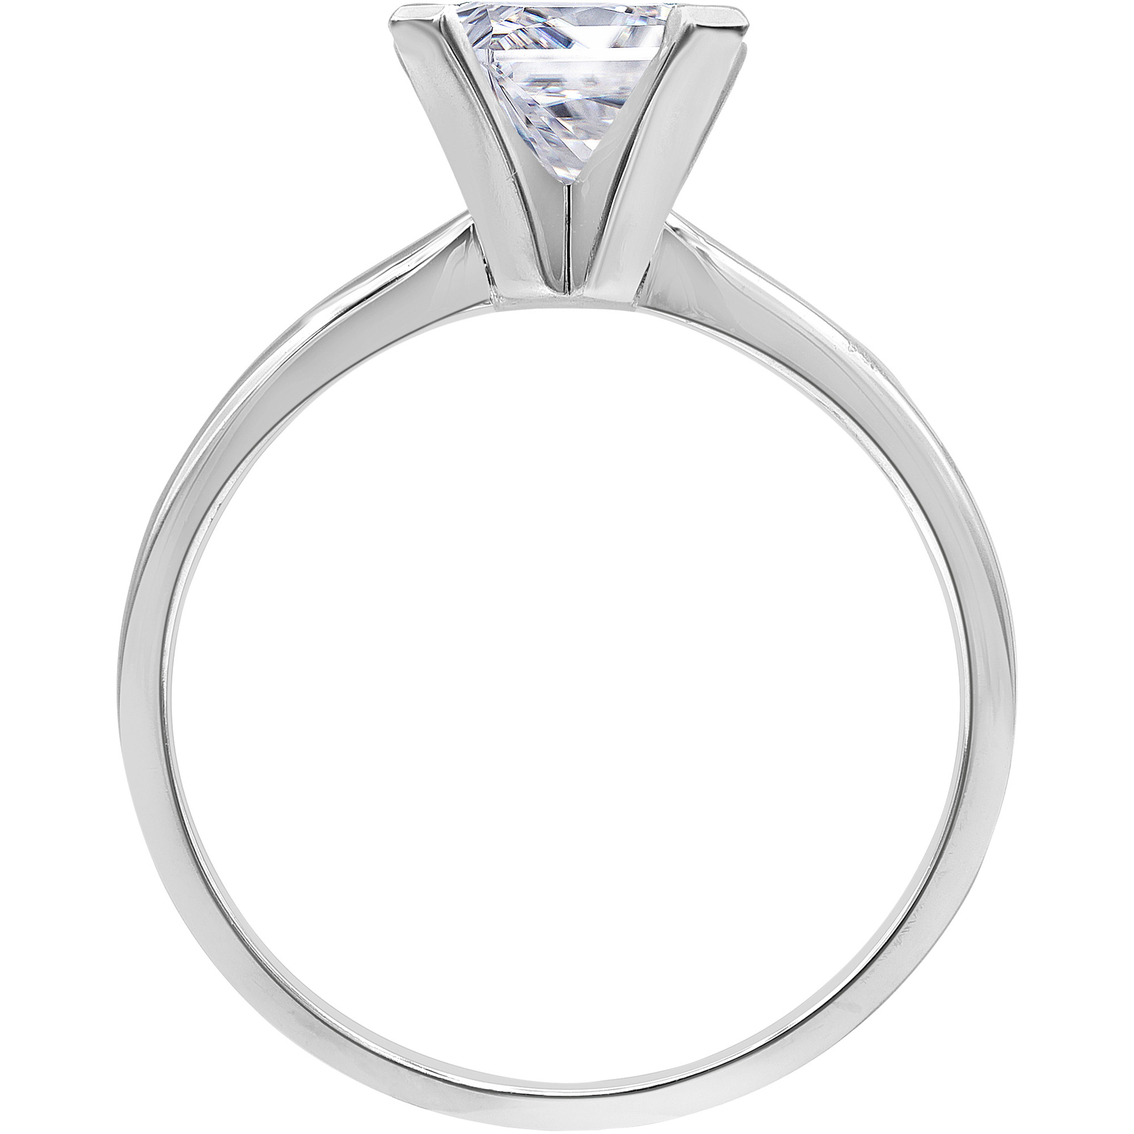 14K Gold 1 ct. Princess Cut Diamond Solitaire Ring Size 7 - Image 5 of 5